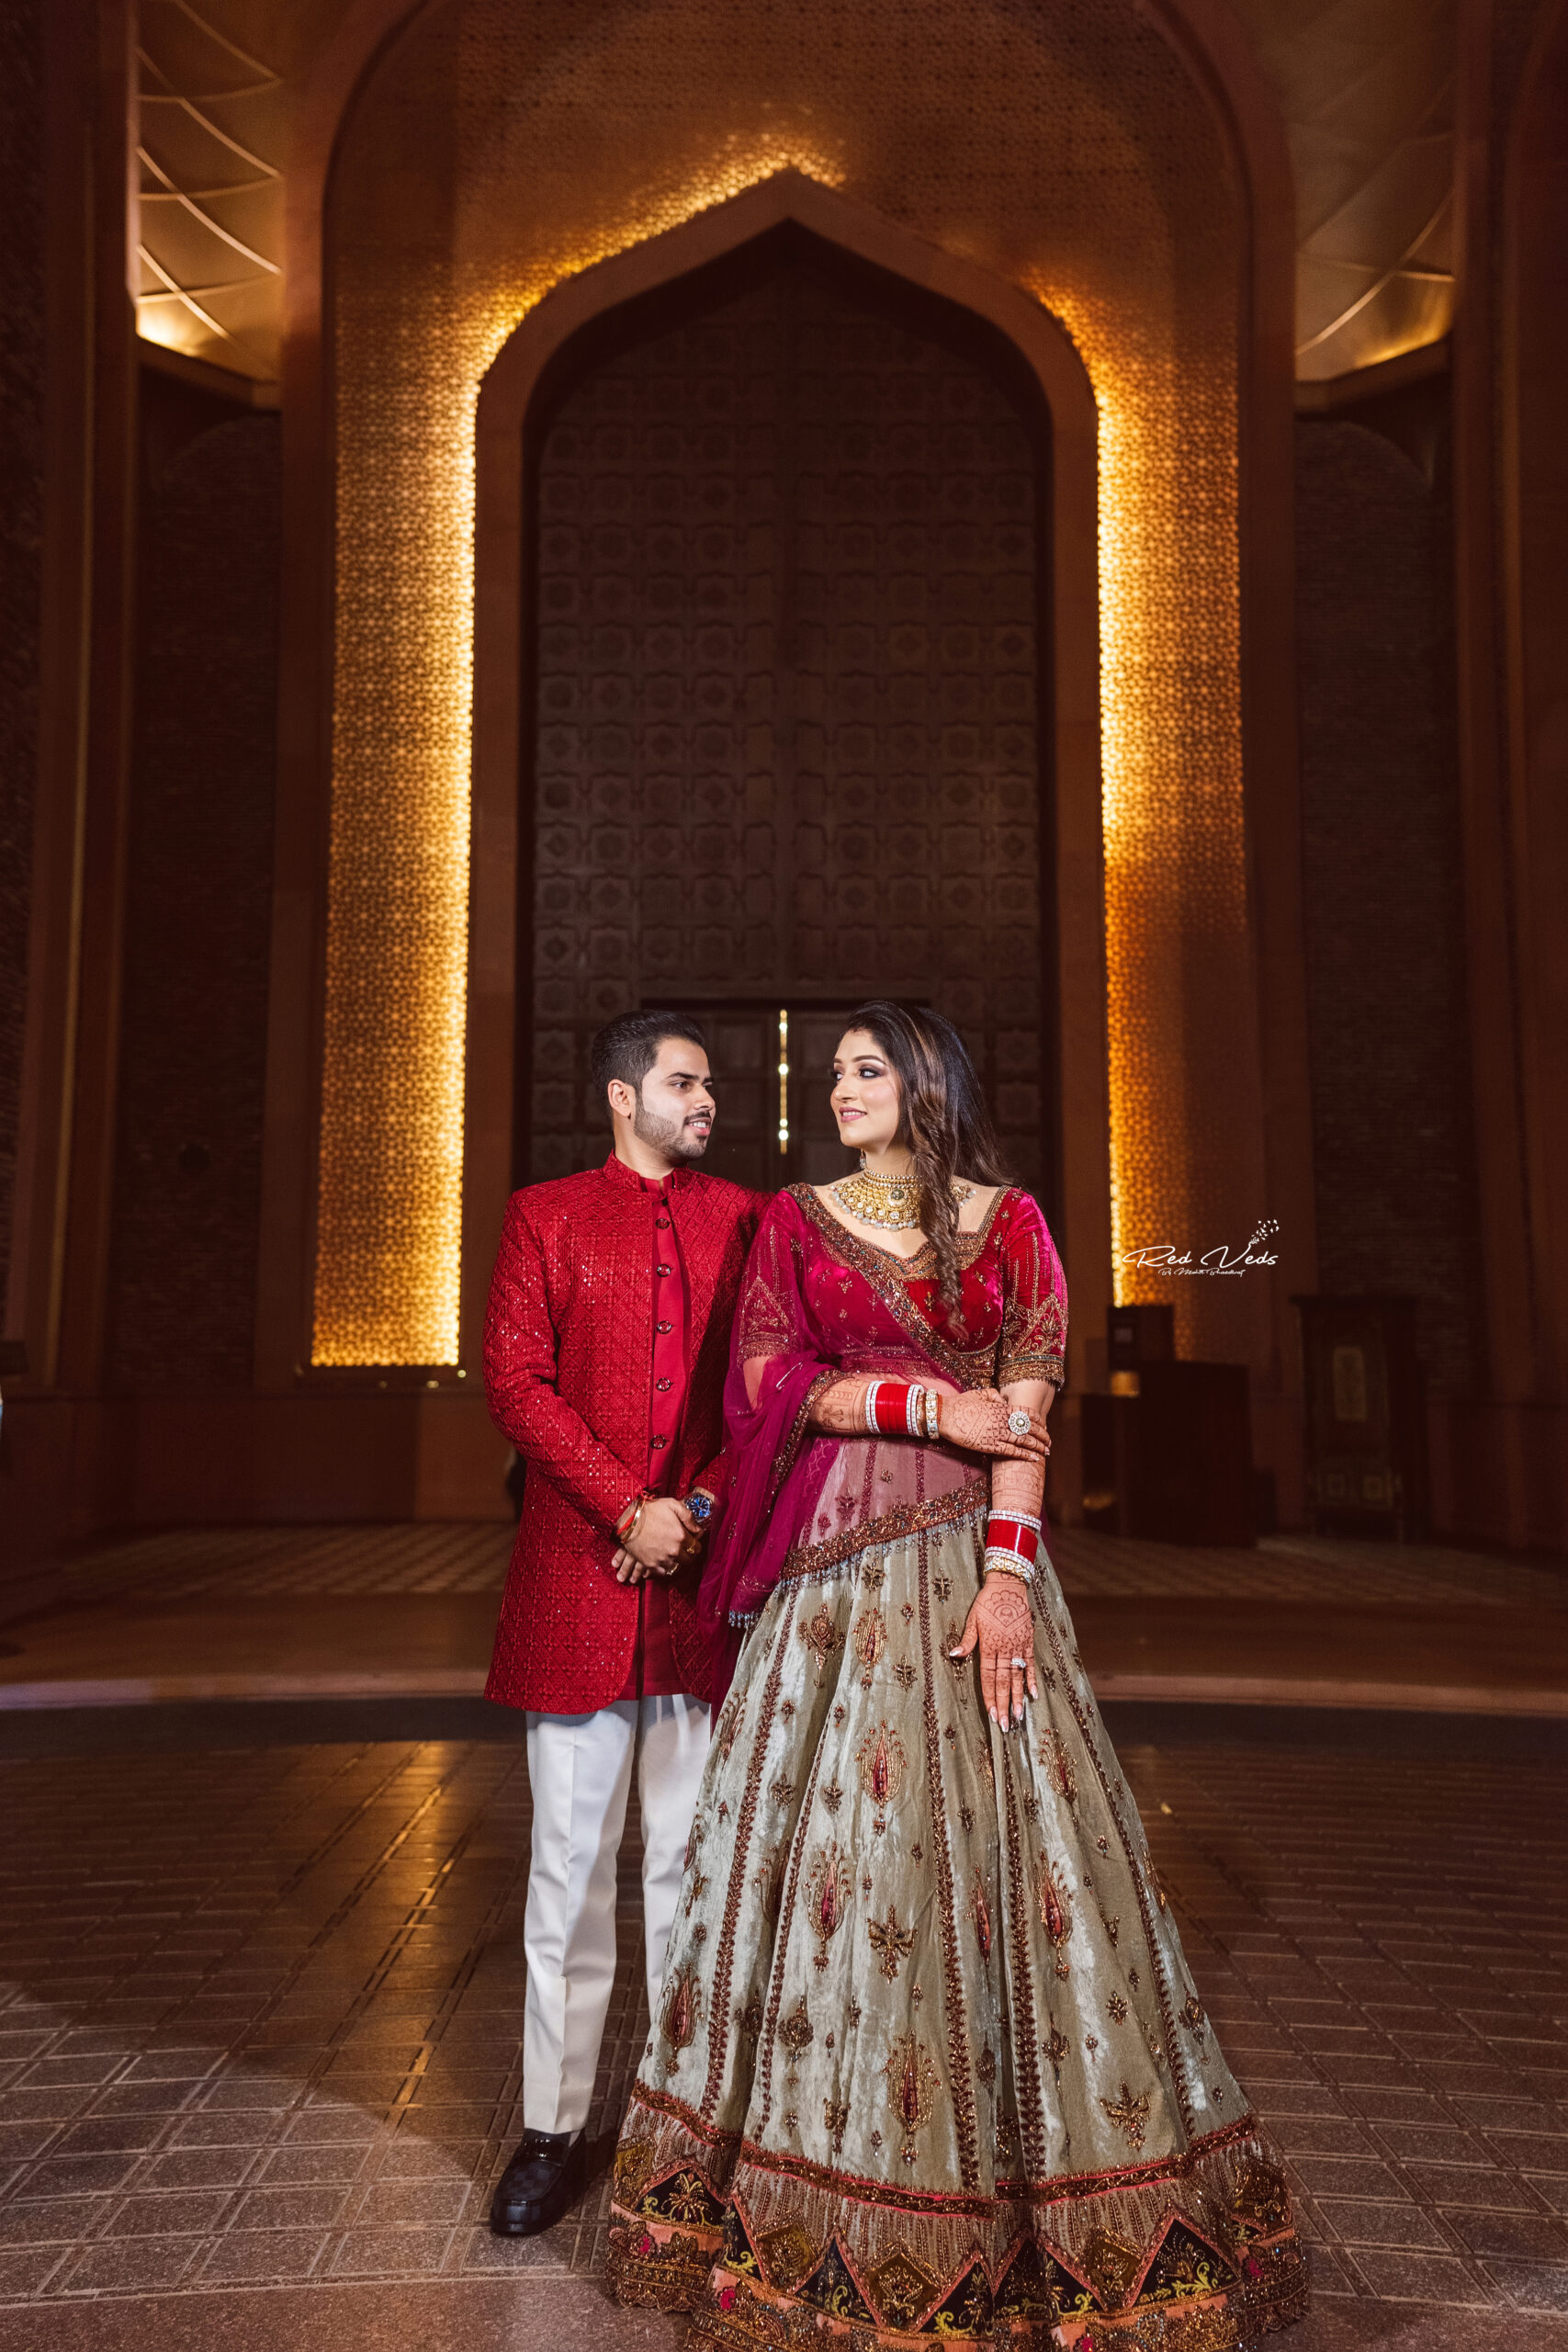 Indian Wedding Photography Ideas you'll embrace for your D-day